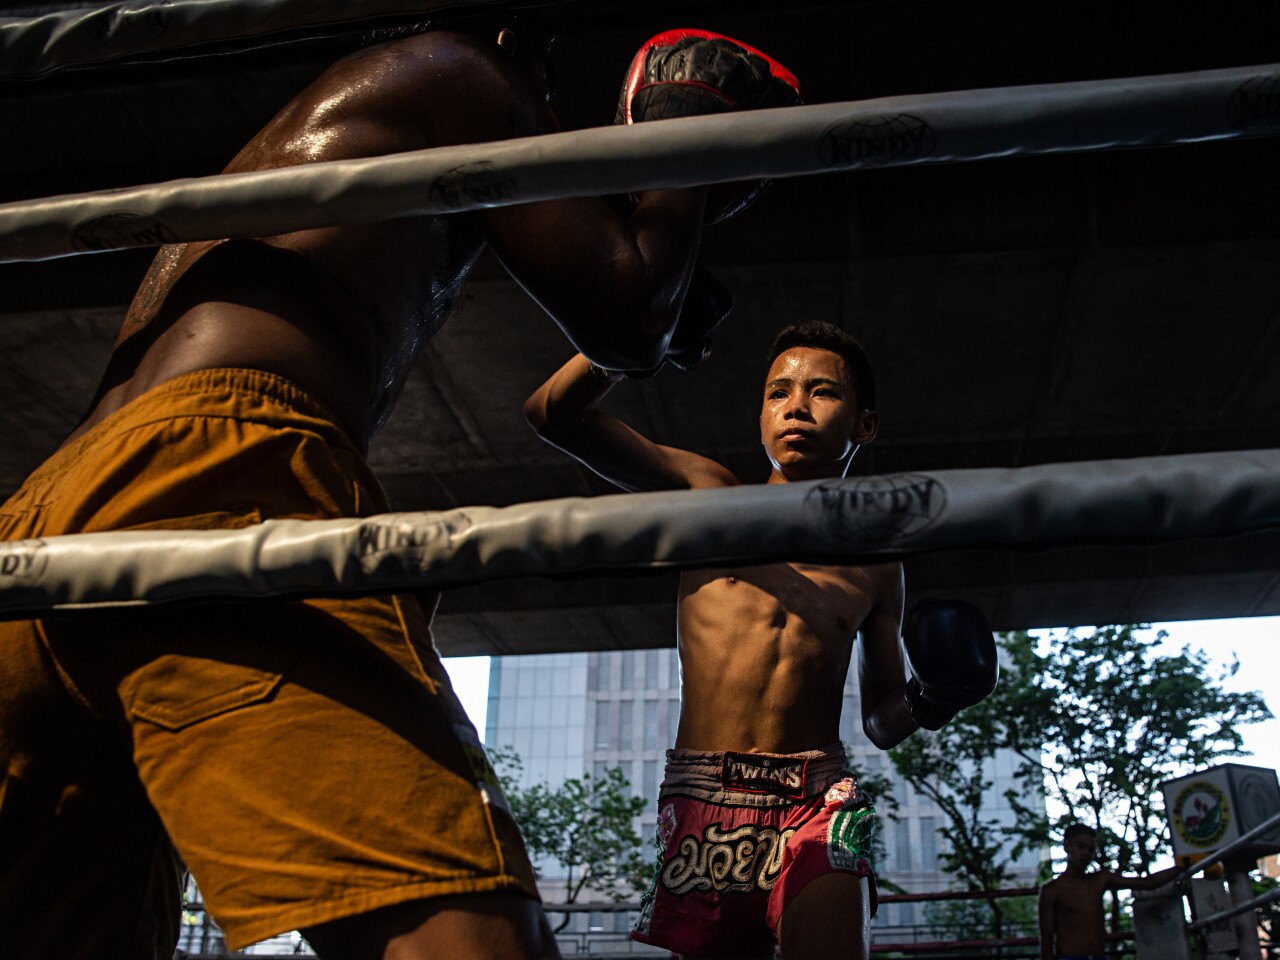 Pheearanut Saleephol, 14, spars against his trainer, Jamlong Jaipakdee,50, at the Sor. Pullsawas Gym in Bangkok, Thailand on Monday April 8, 2019. Thai Boxing, locally known as Muay Thai, is considered to be the national sport of Thailand, with children as young as 8 years old competing professionally. In recent years, allowing children under the age of 15 to compete has become controversial due to potential health risks. Pheearanut has been boxing since age 12. His adoptive father and grandfather boxed professionally in their youth and he decided to follow in their footsteps. Photo by Lauren DeCicca